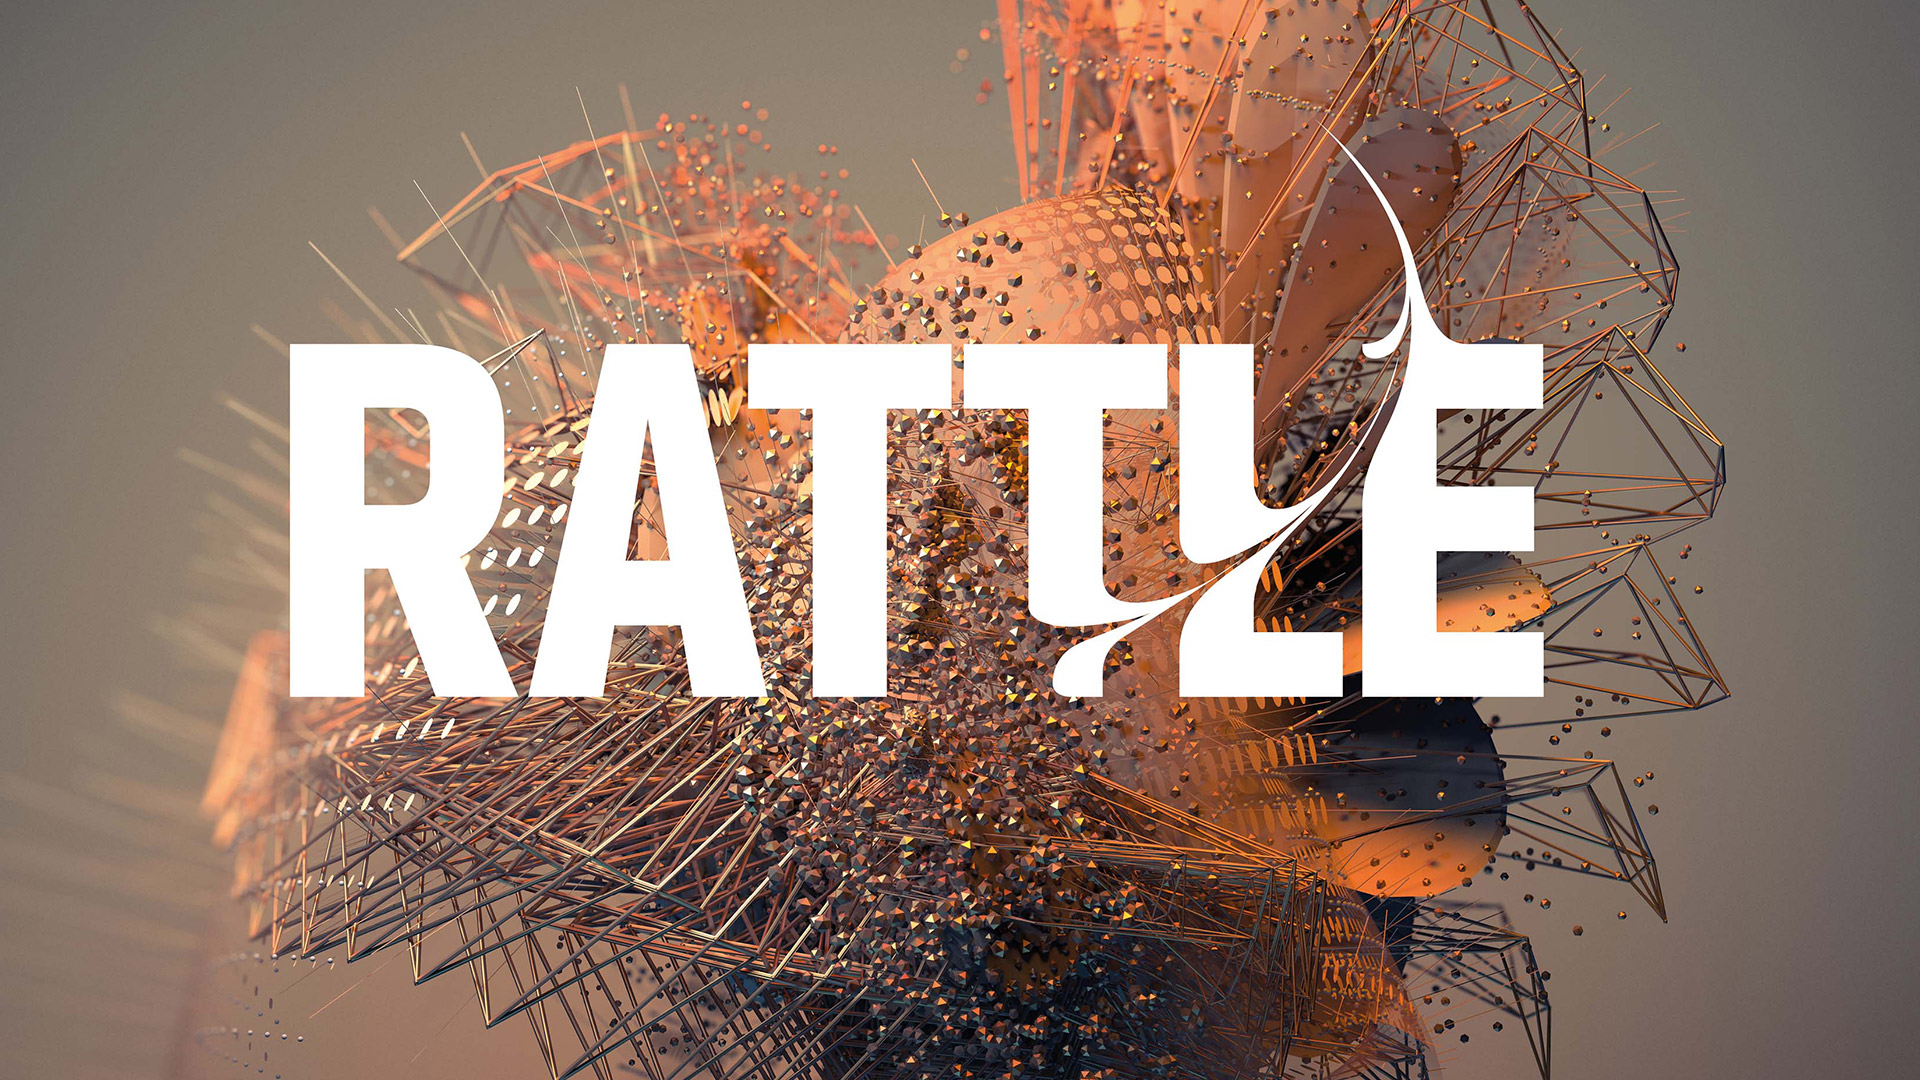 Visual Identity conducted by Sir Simon Rattle